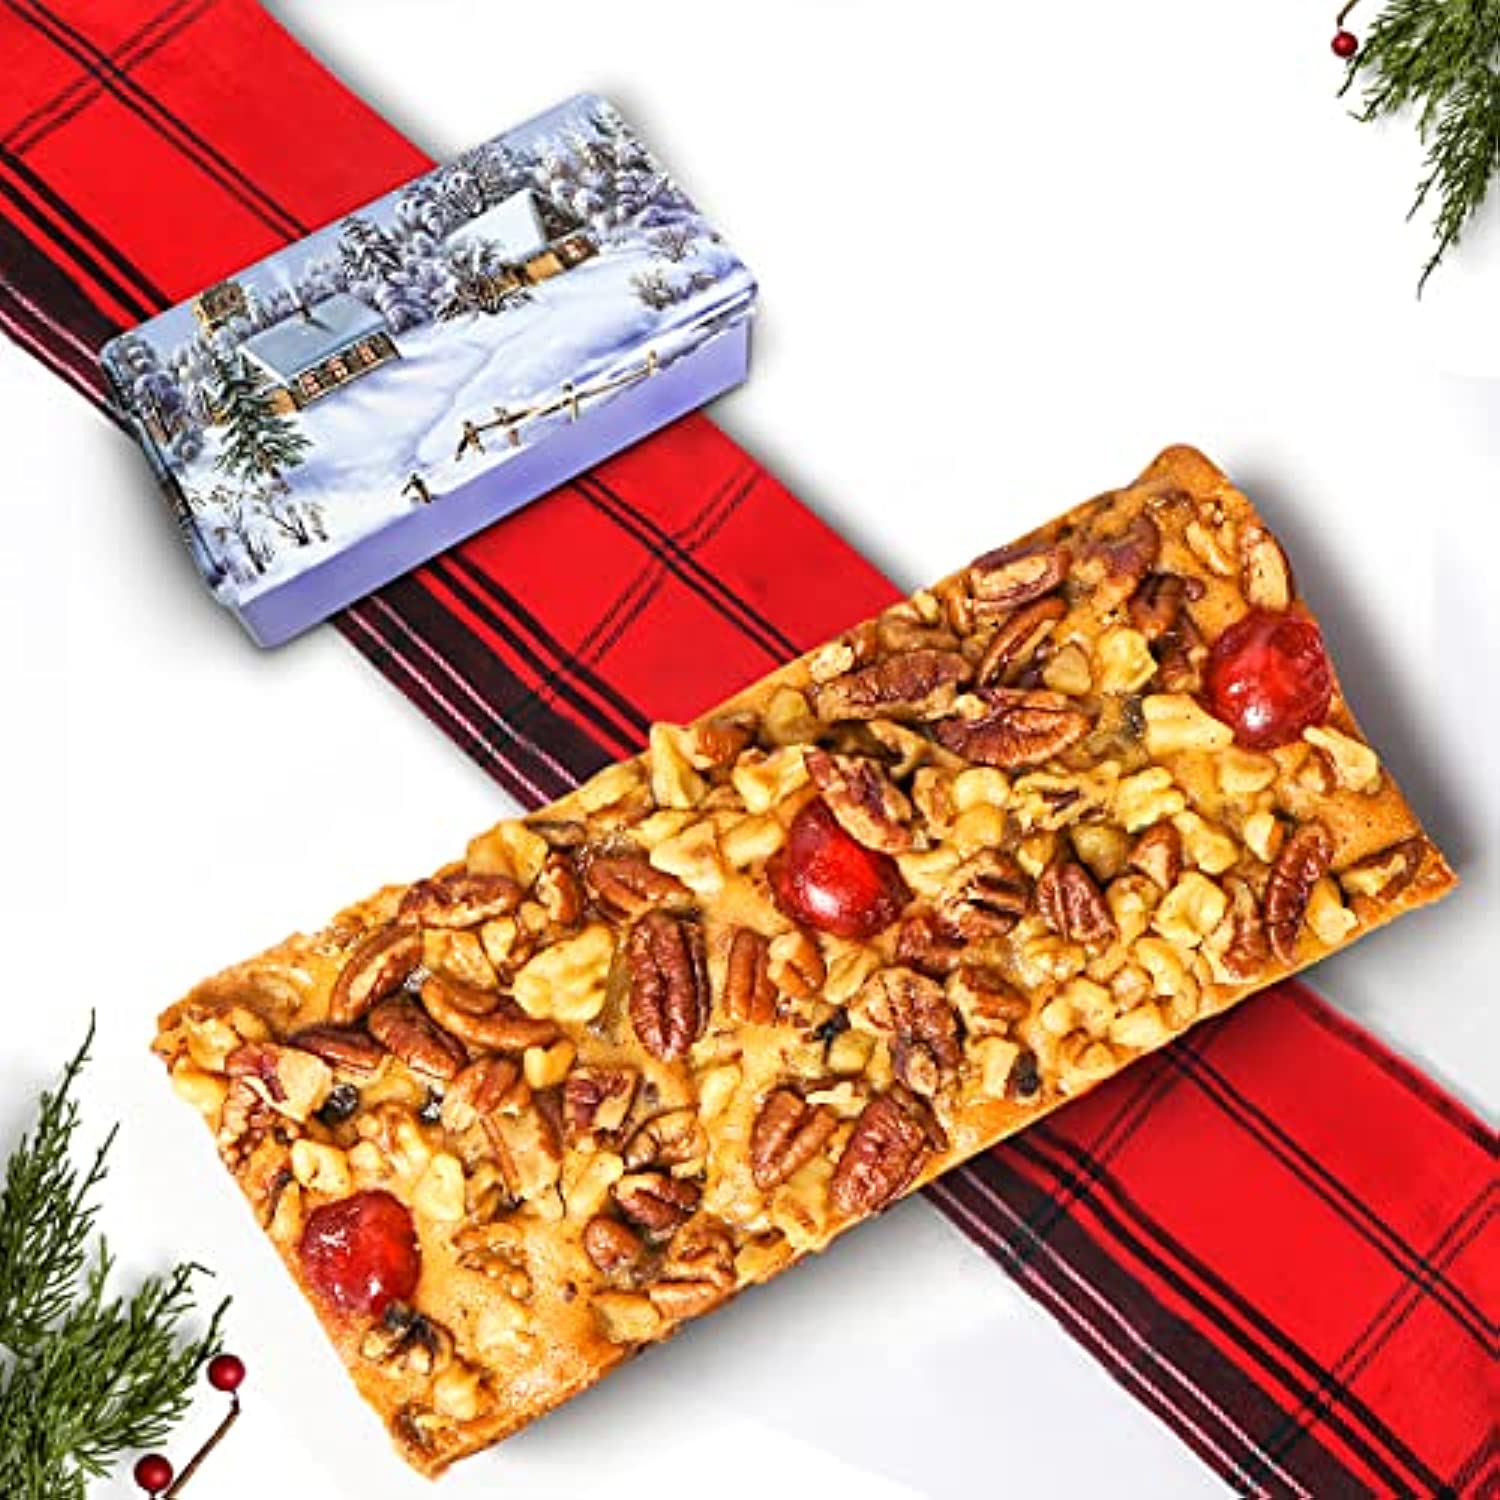 1lb Gourmet Fruit Cake � w/ Festive Cake Tin � Delicious British Food & English Holiday Cakes for Delivery Direct to Your Door � Moist Fruitcake Perfect for Christmas Gifts � by Crave Island